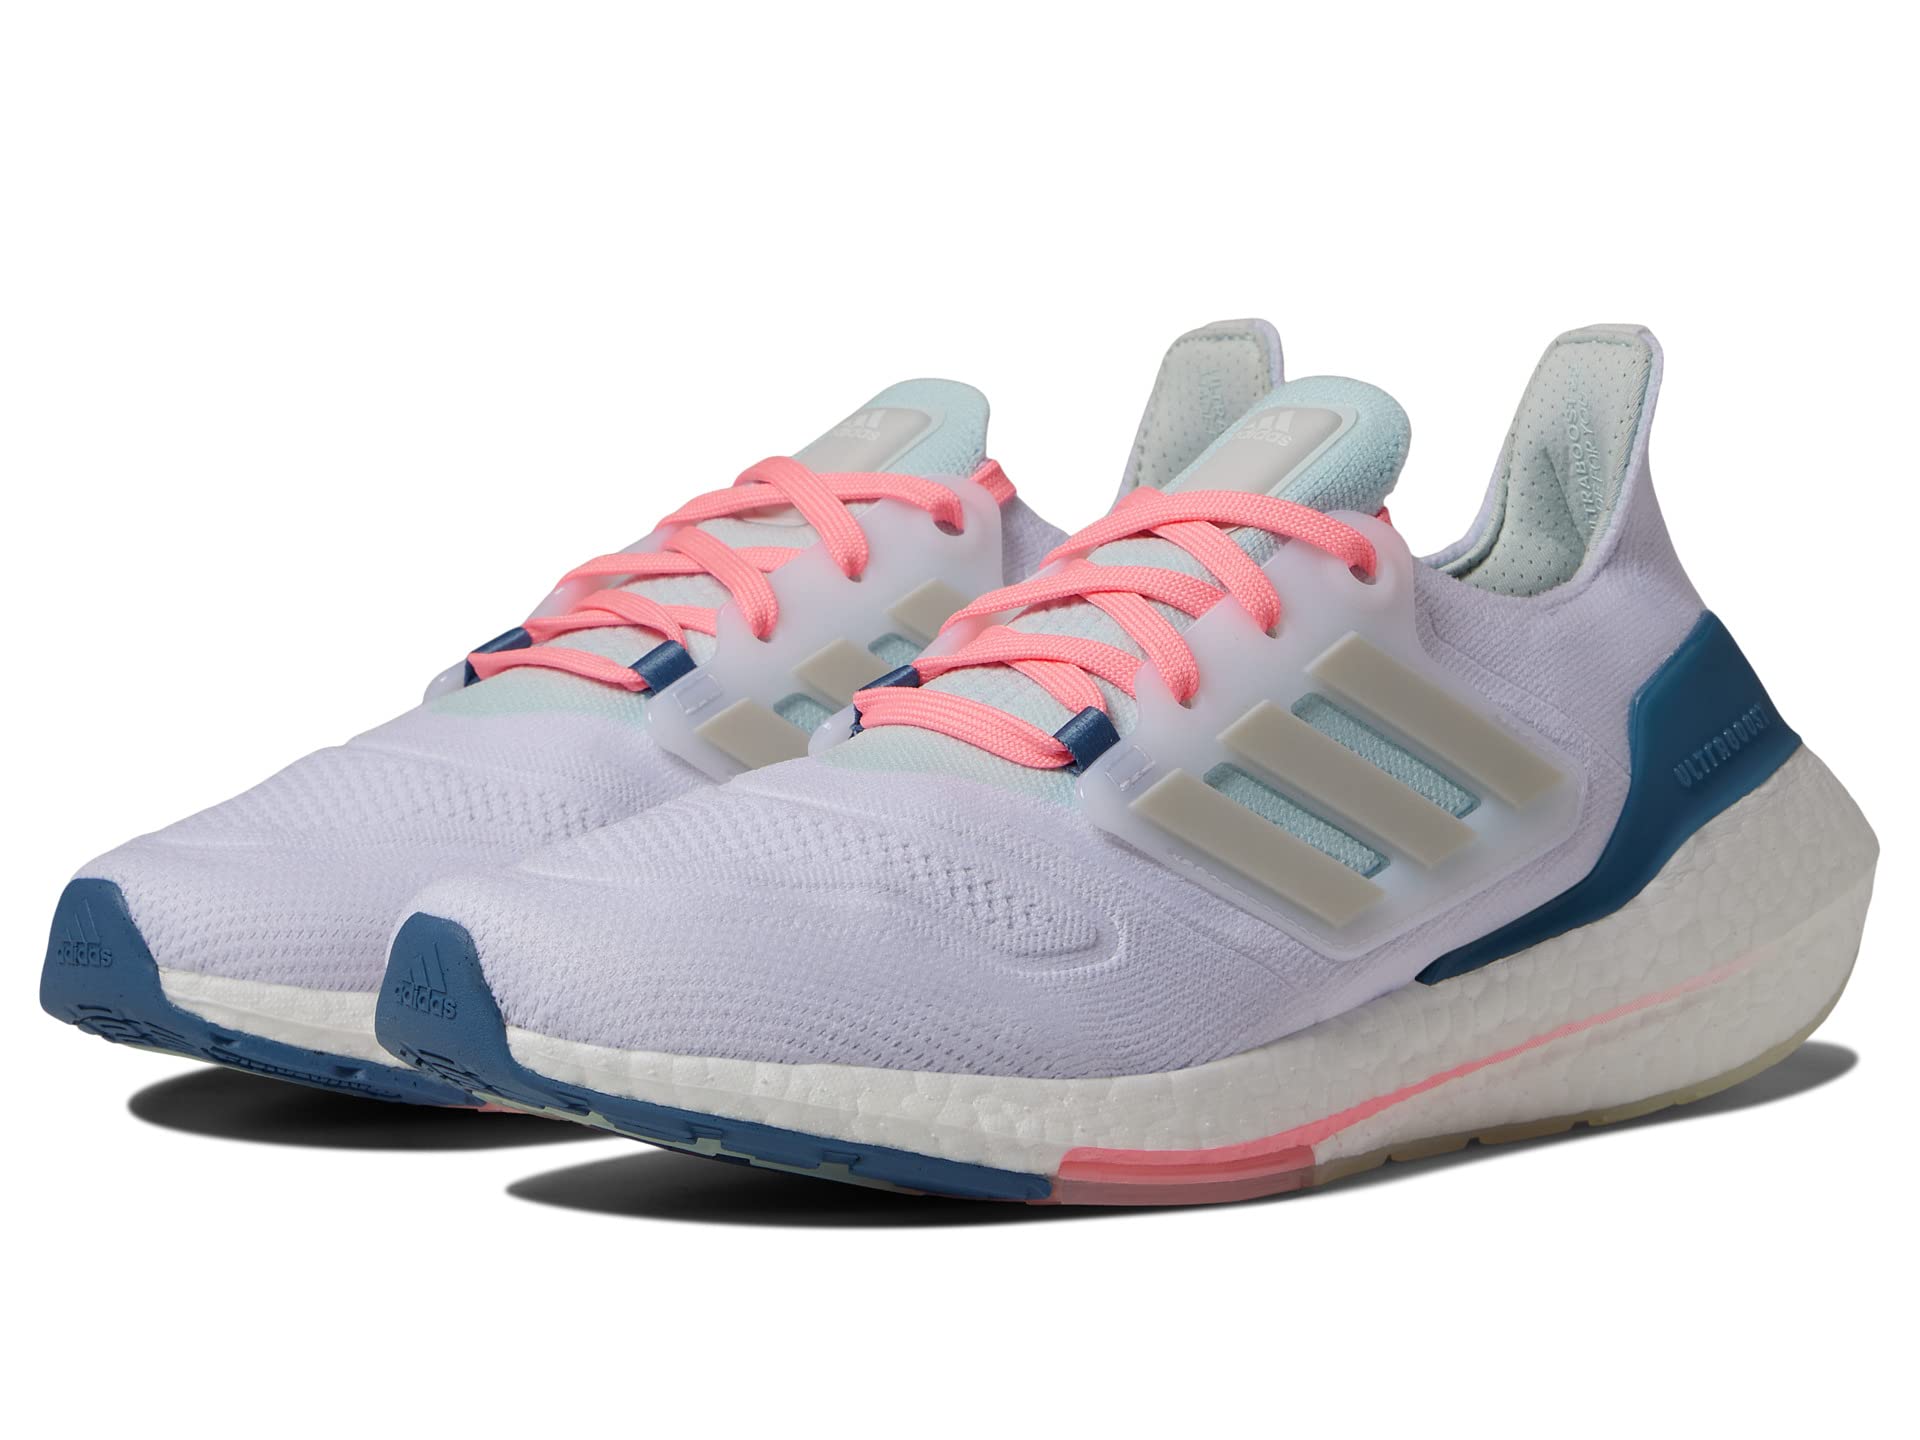 Кроссовки adidas Running, Ultraboost 22 кроссовки adidas originals forum unisex almost yellow almost blue footwear white